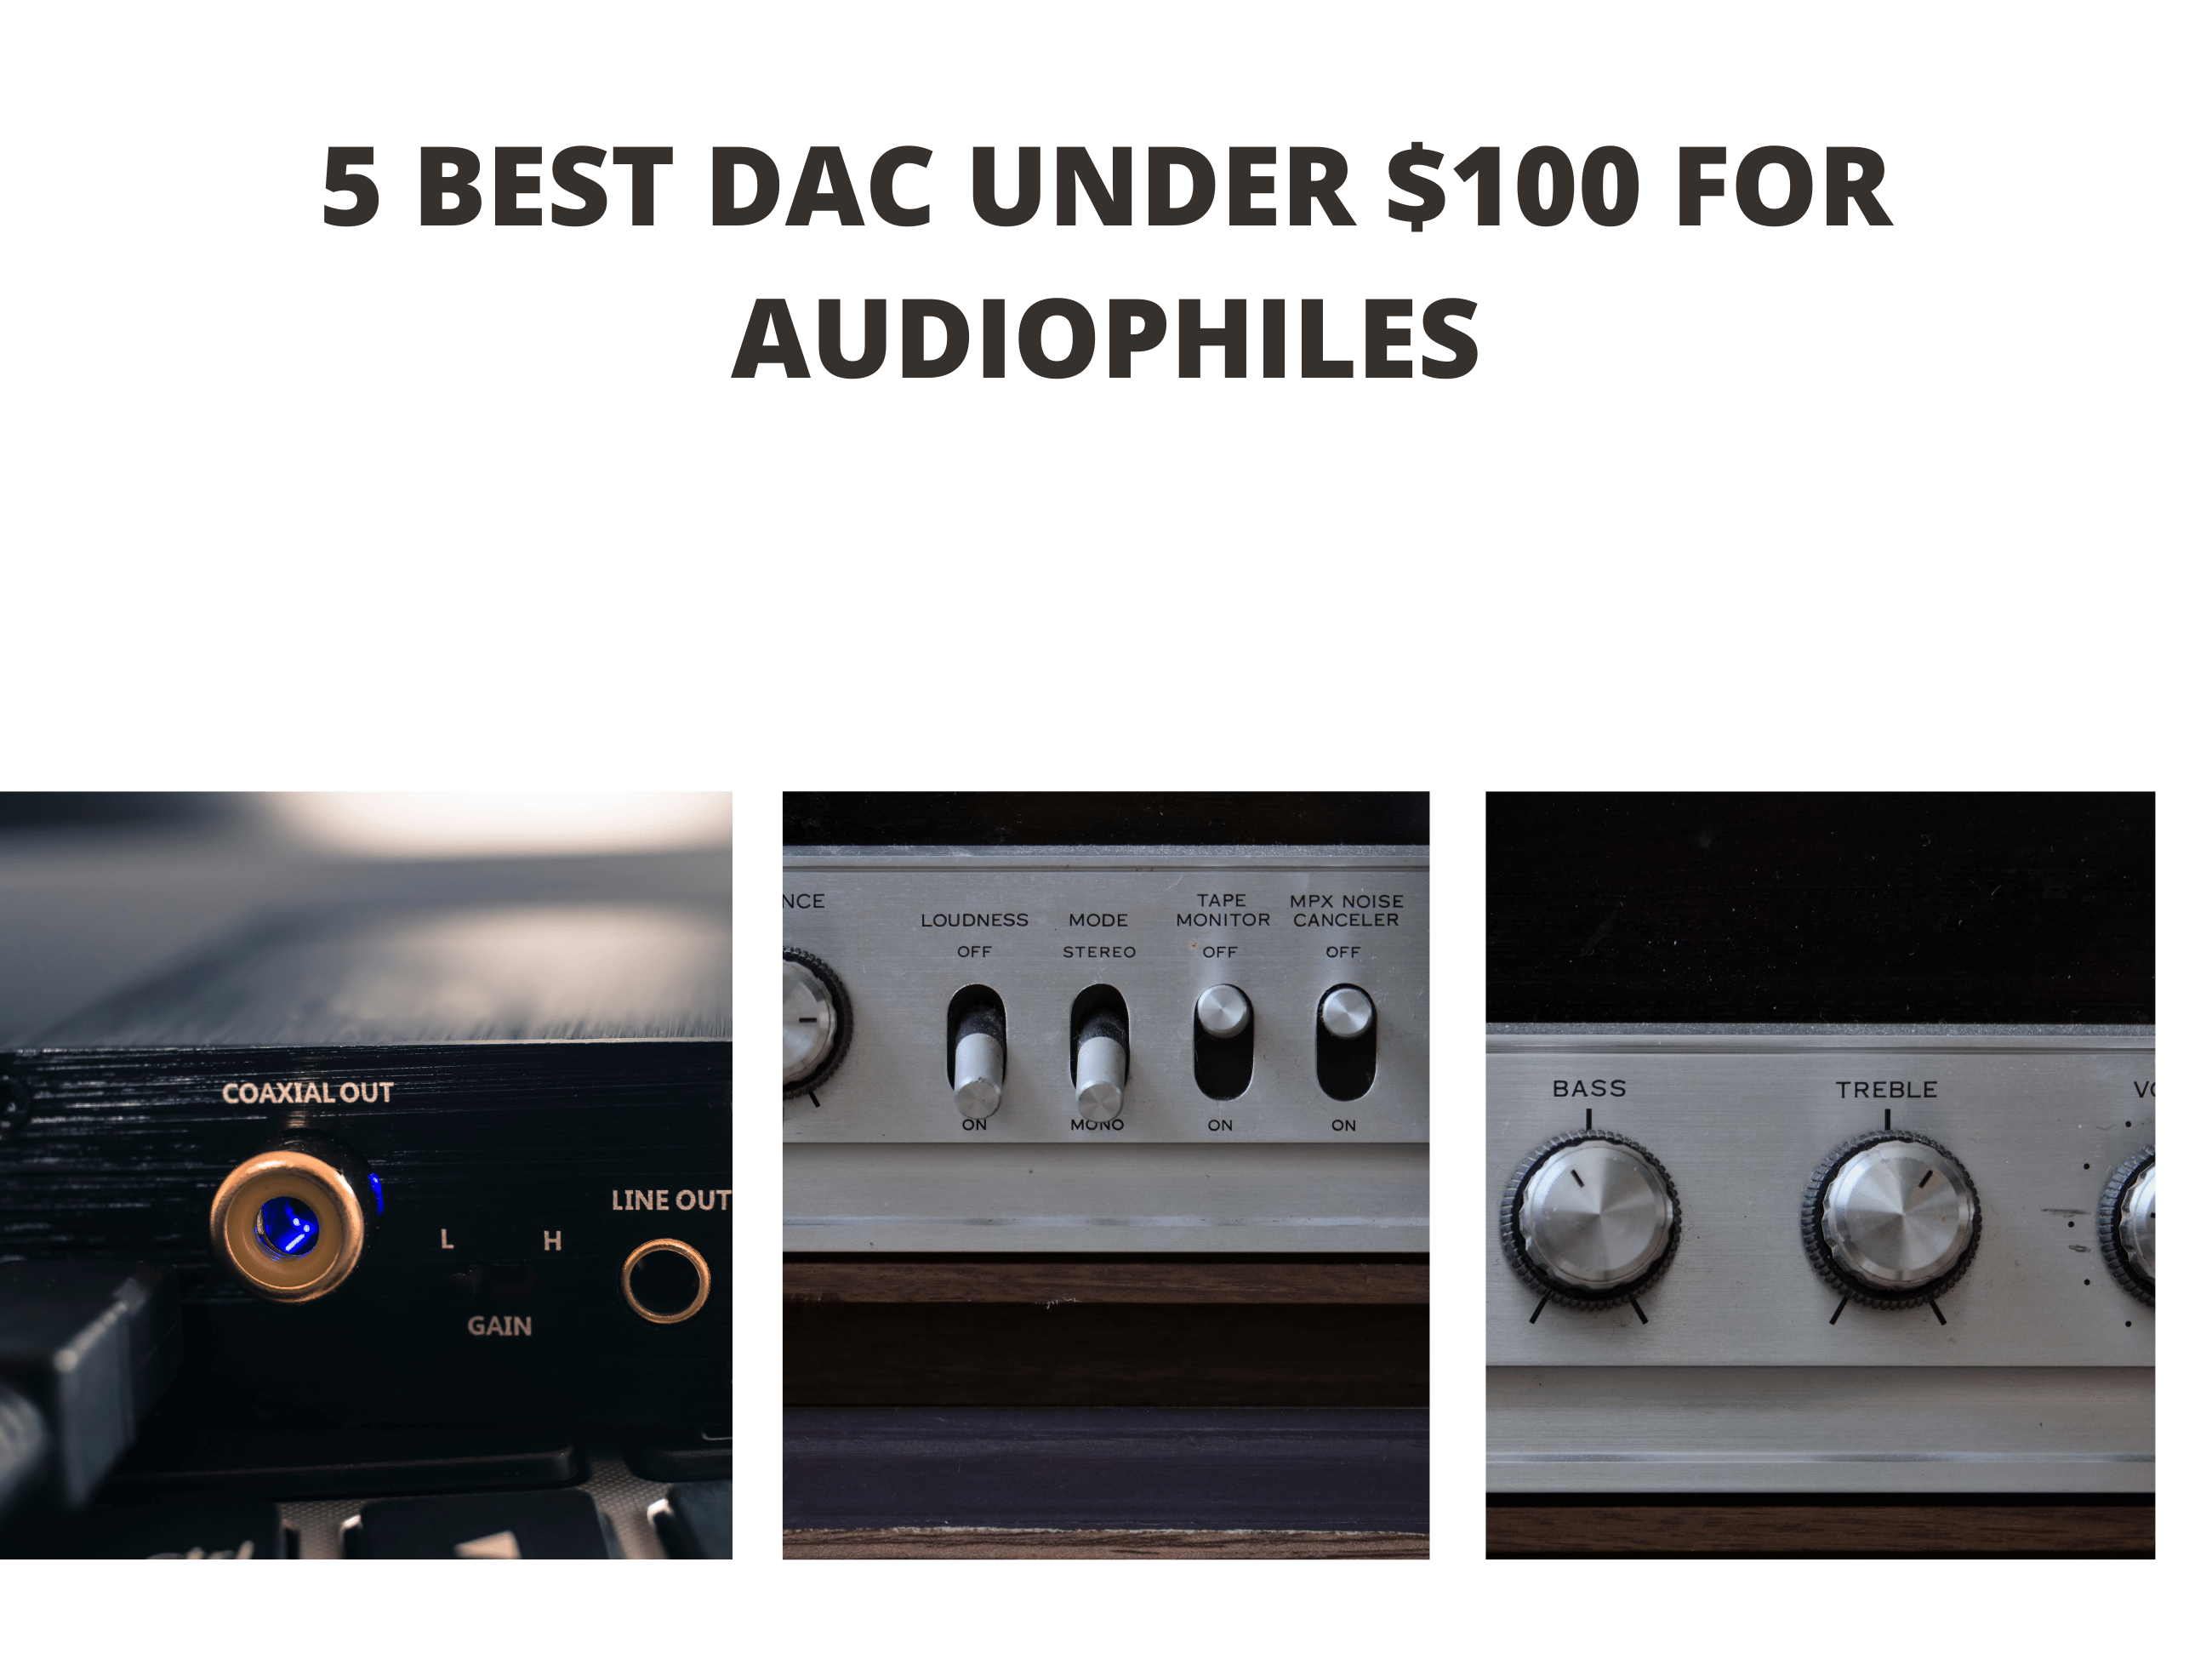 5 Best DAC under $100 for Audiophiles